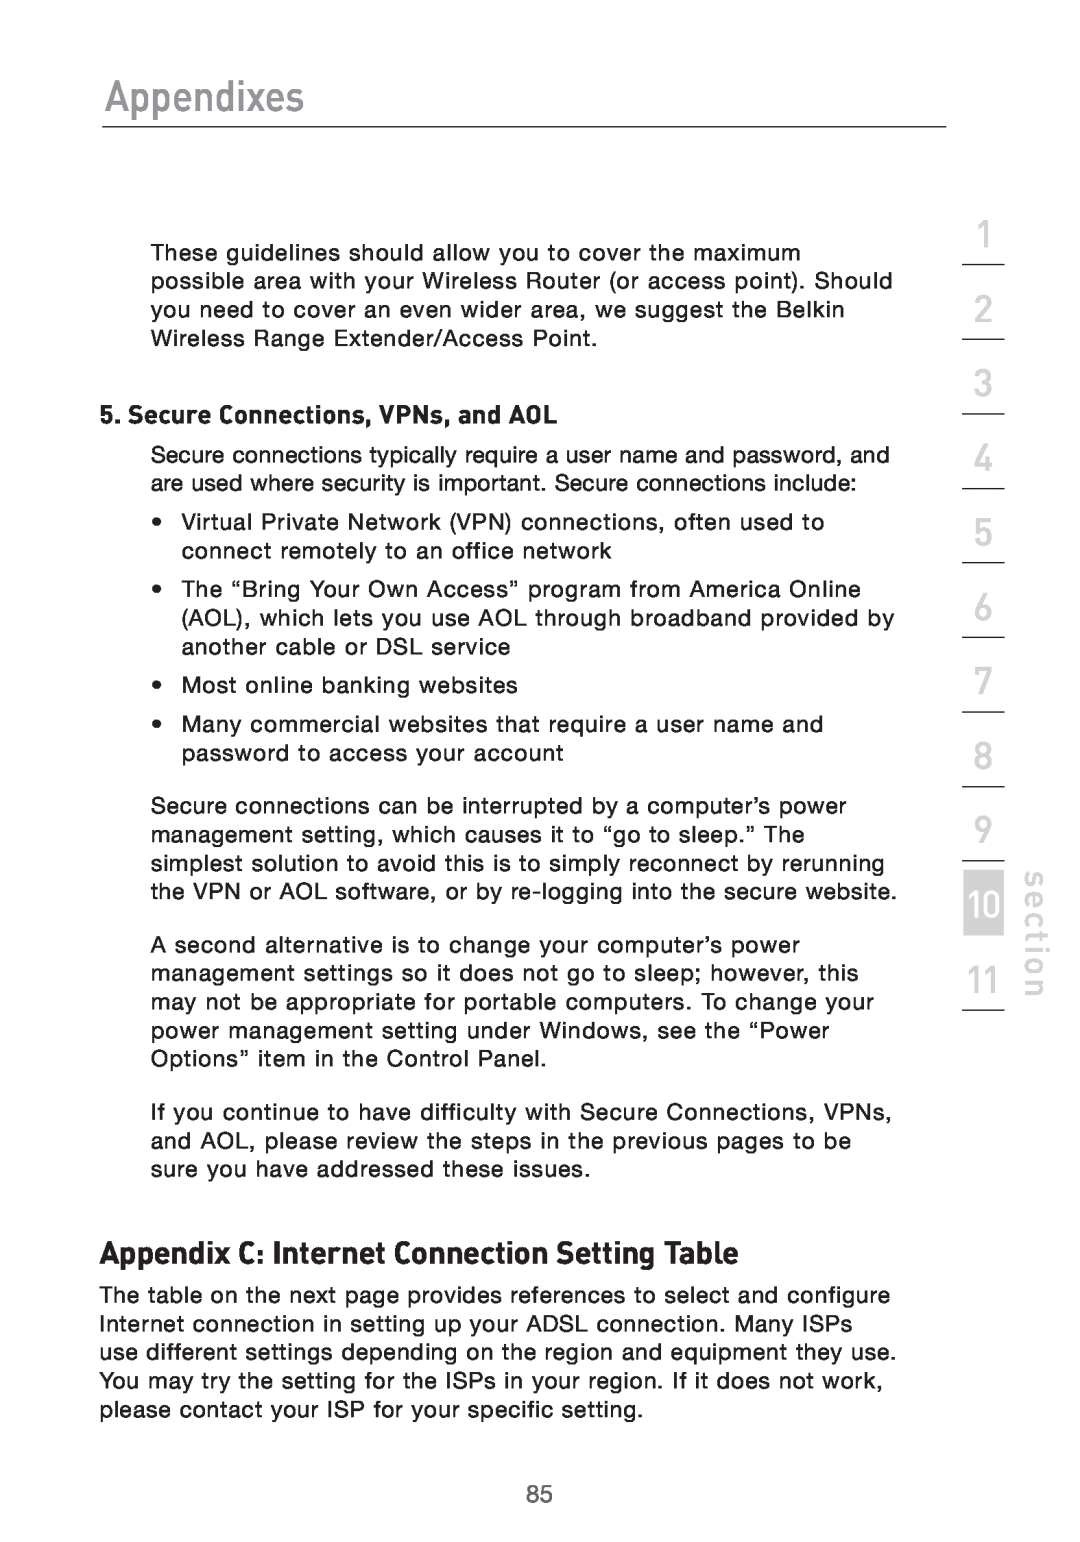 Belkin Pre-N manual Appendix C Internet Connection Setting Table, Secure Connections, VPNs, and AOL, Appendixes, section 